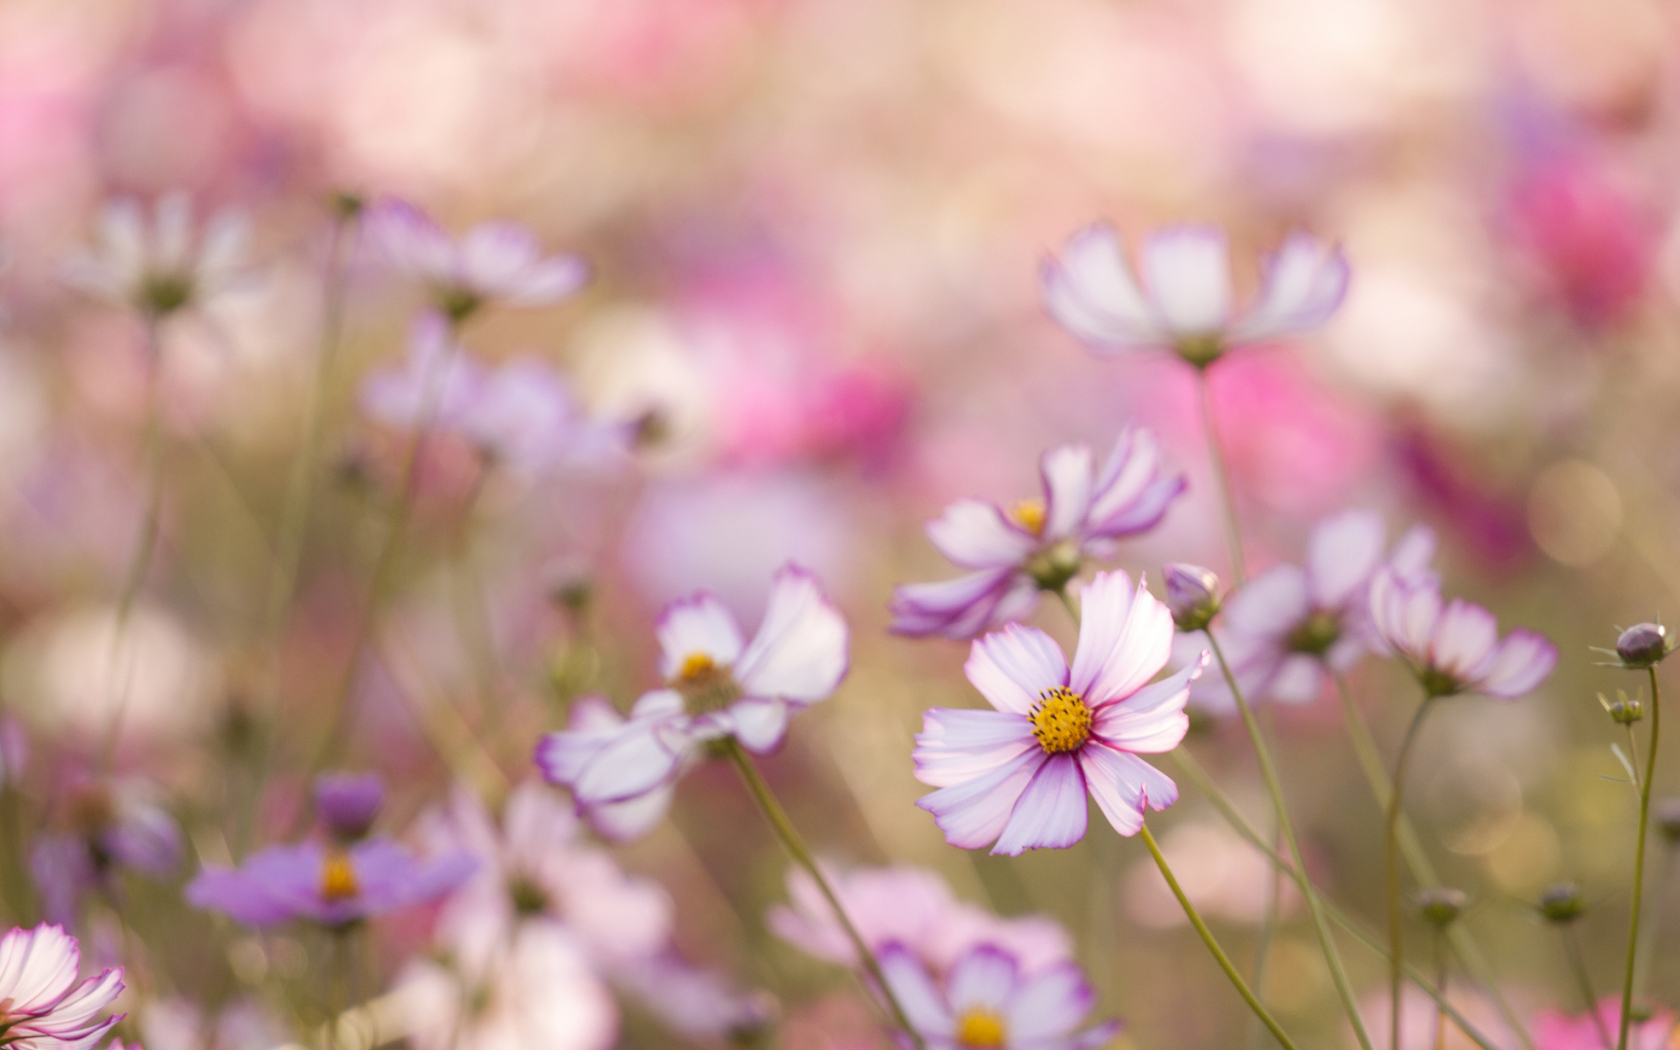 Das Field Of White And Pink Petals Wallpaper 1680x1050